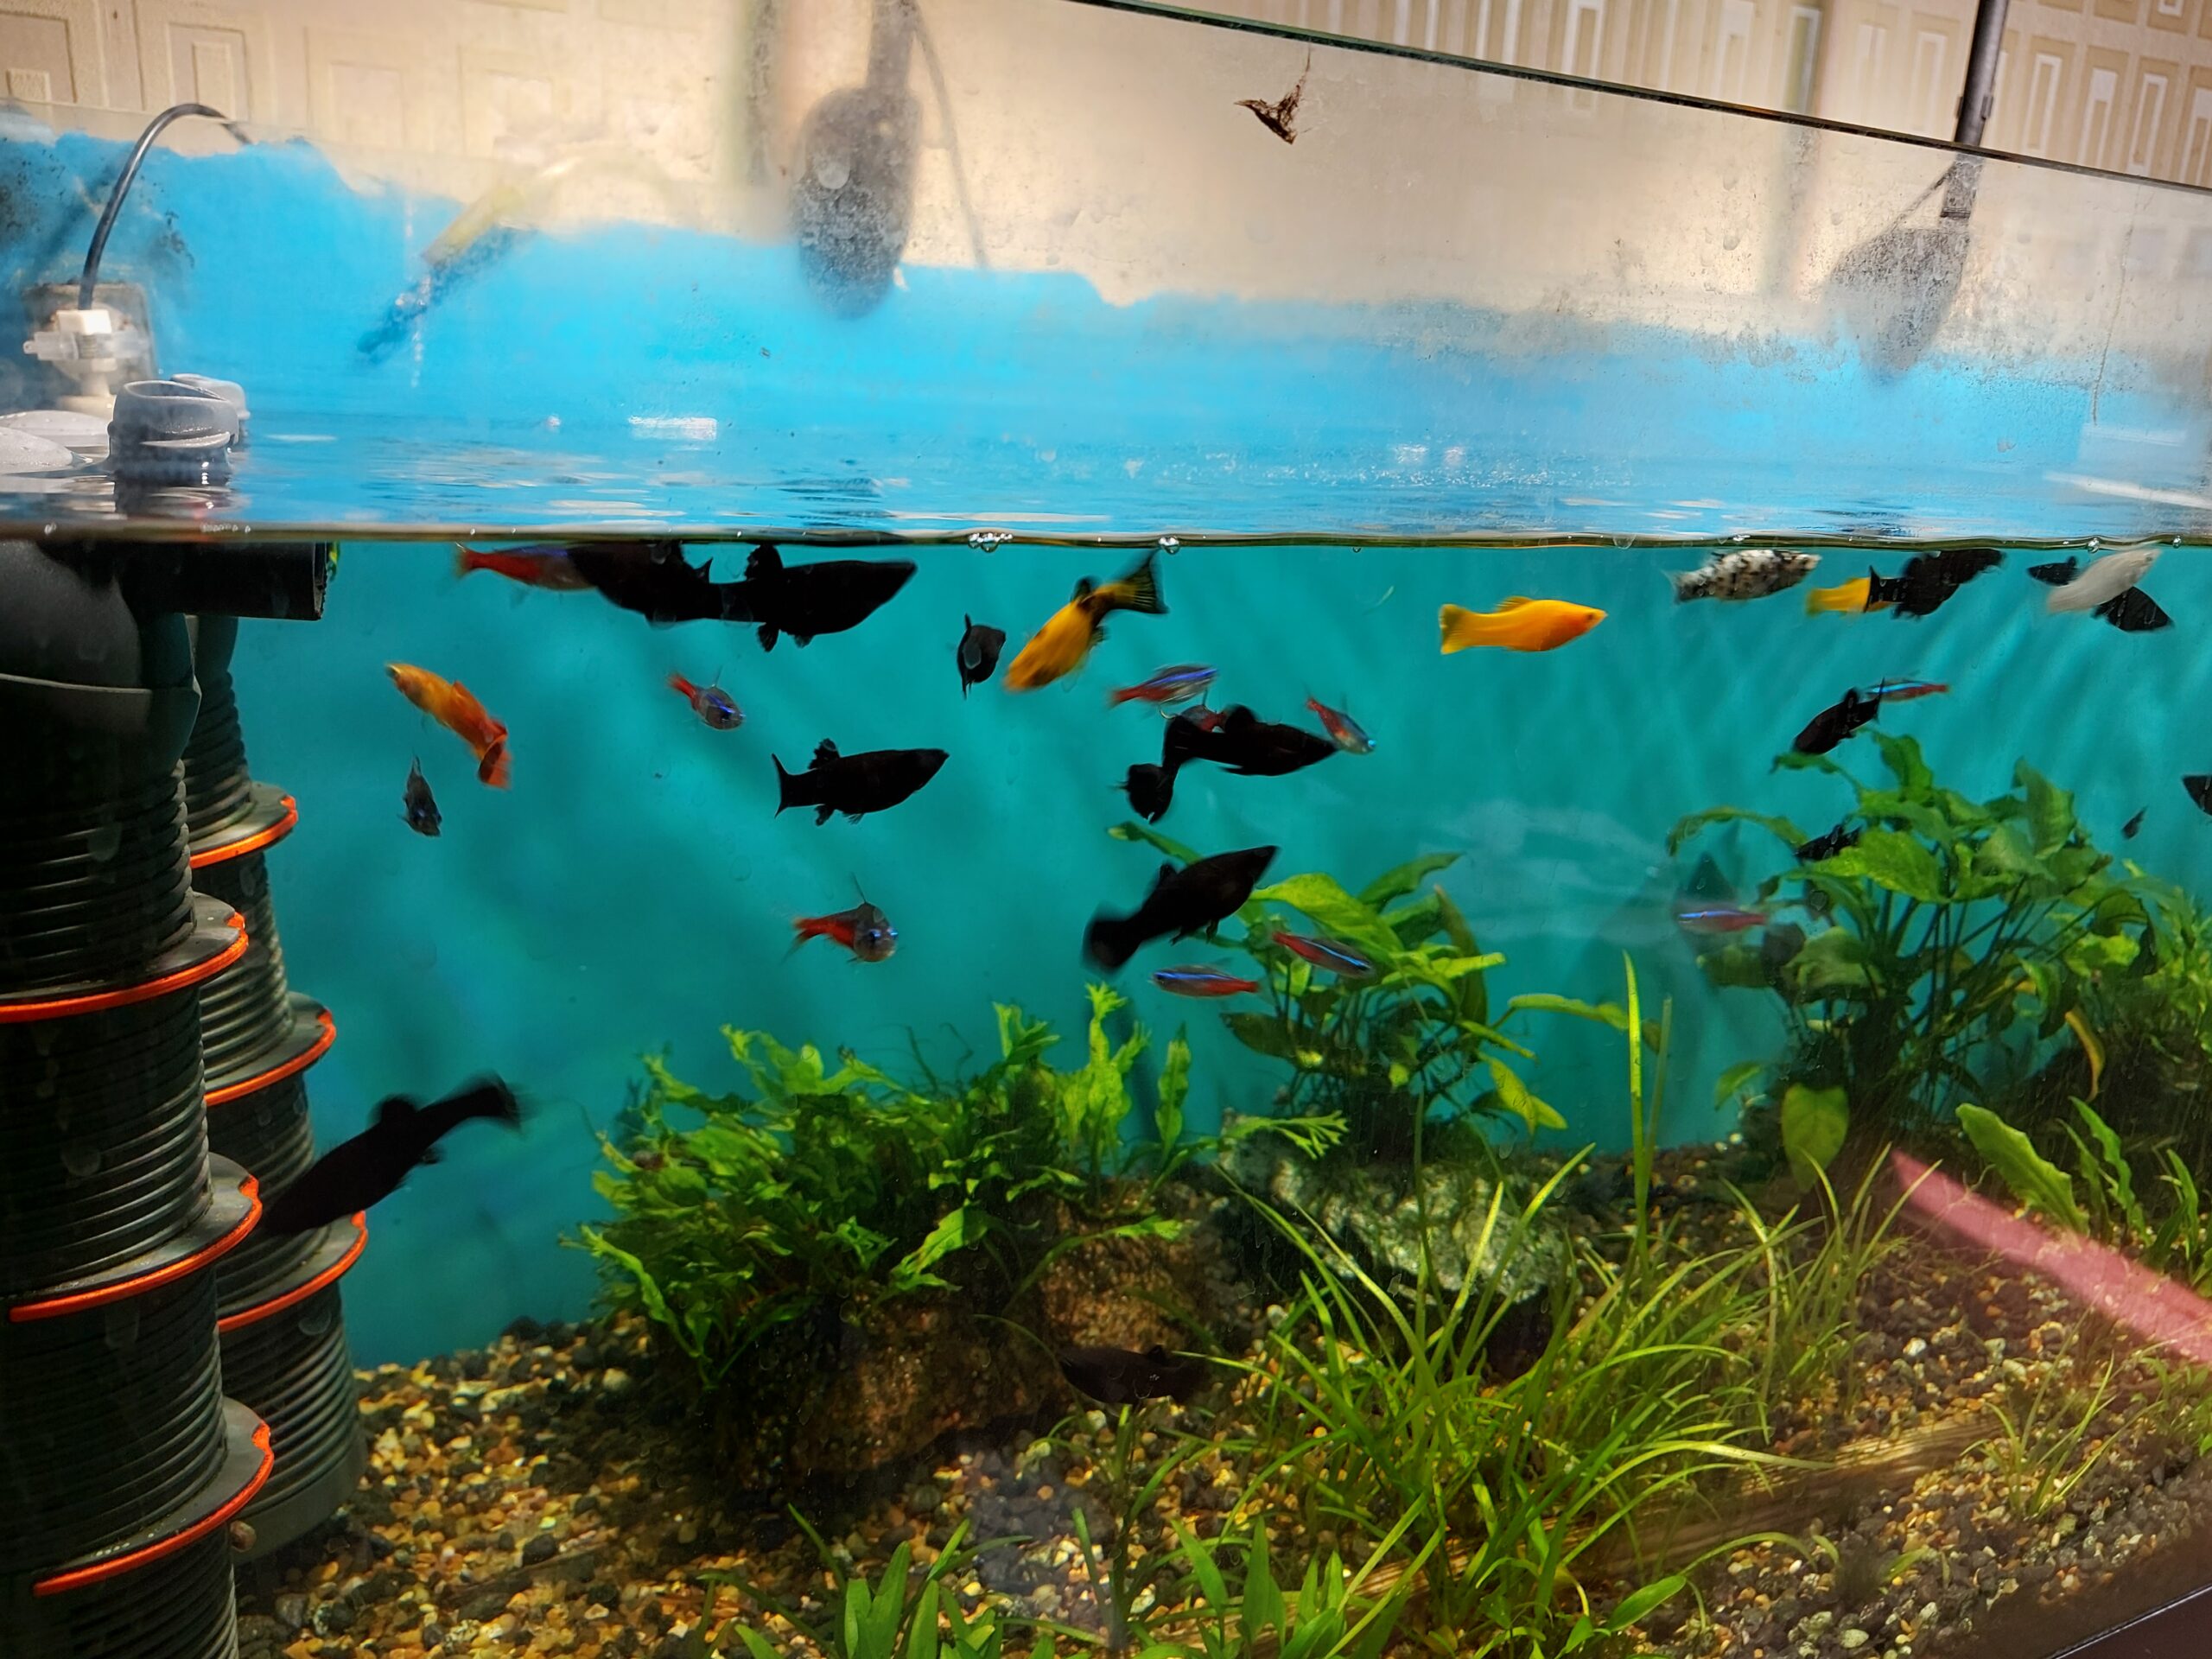 Do Platy Fish Eat Snails? A Comprehensive Guide to Platy Fish Feeding Habits